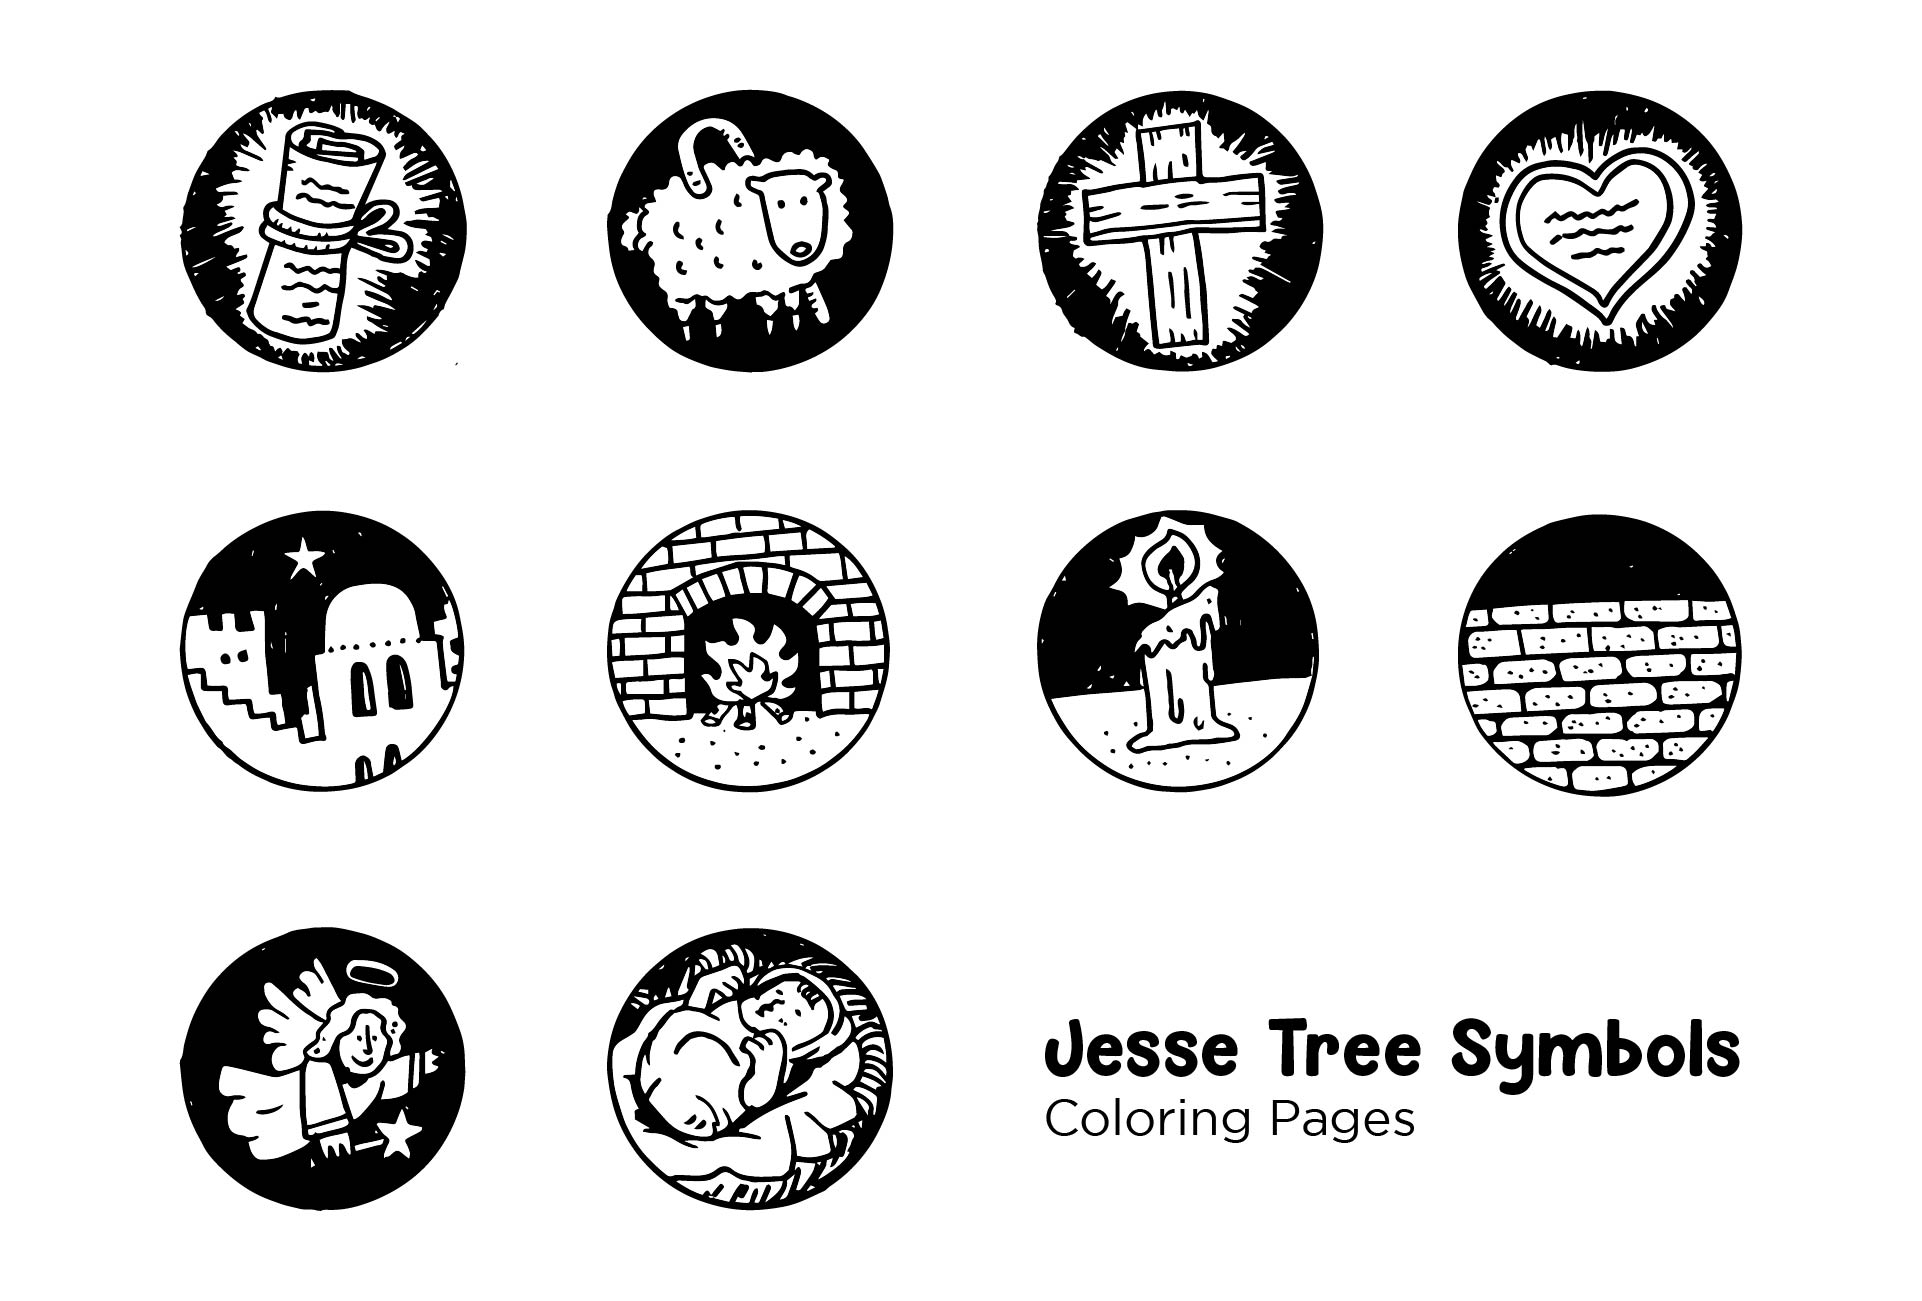 Printable Jesse Tree Symbols Coloring Pages